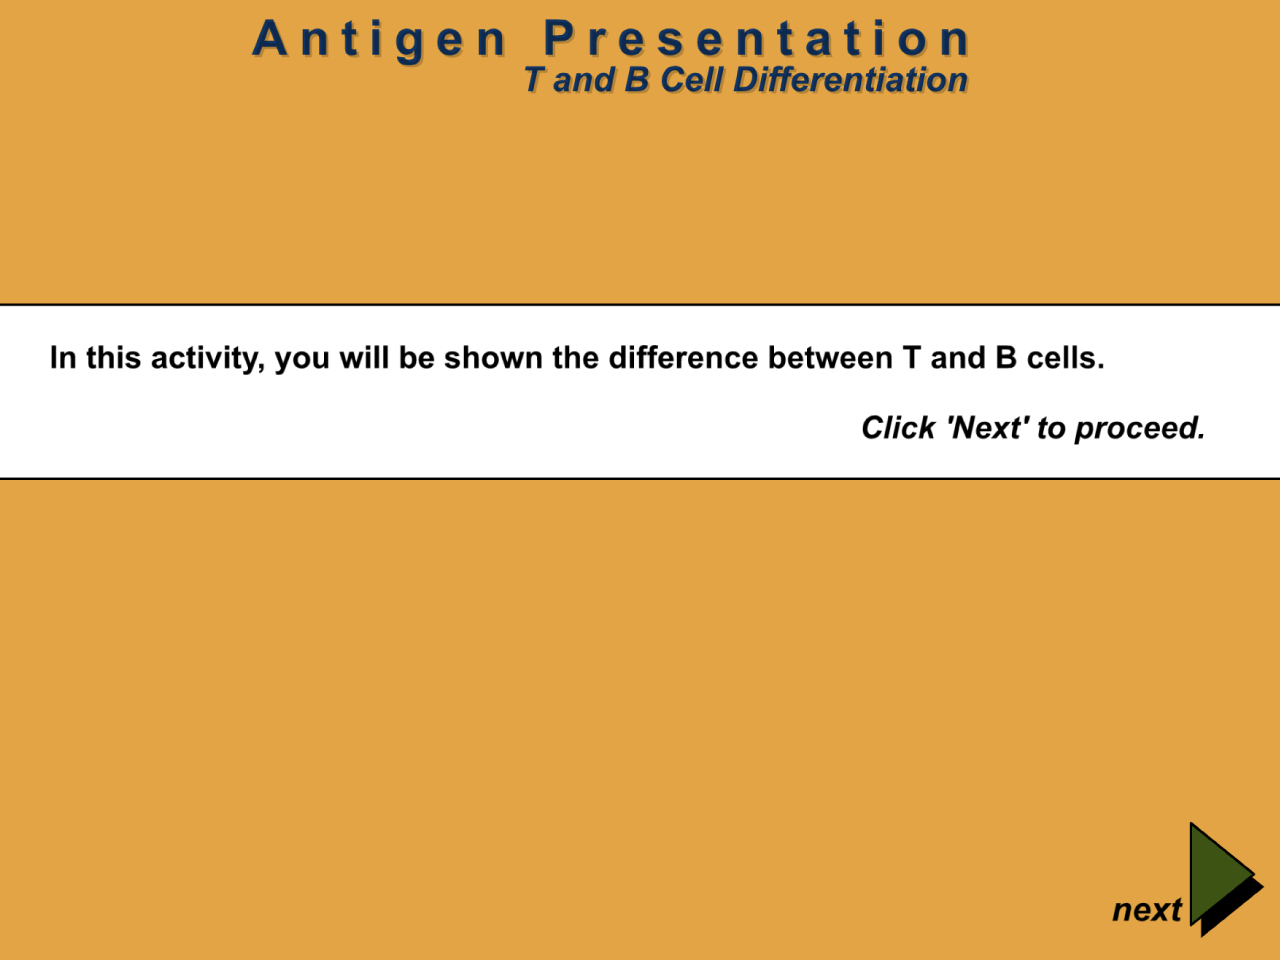 Antigen Presentation: T and B Cell Differentiation